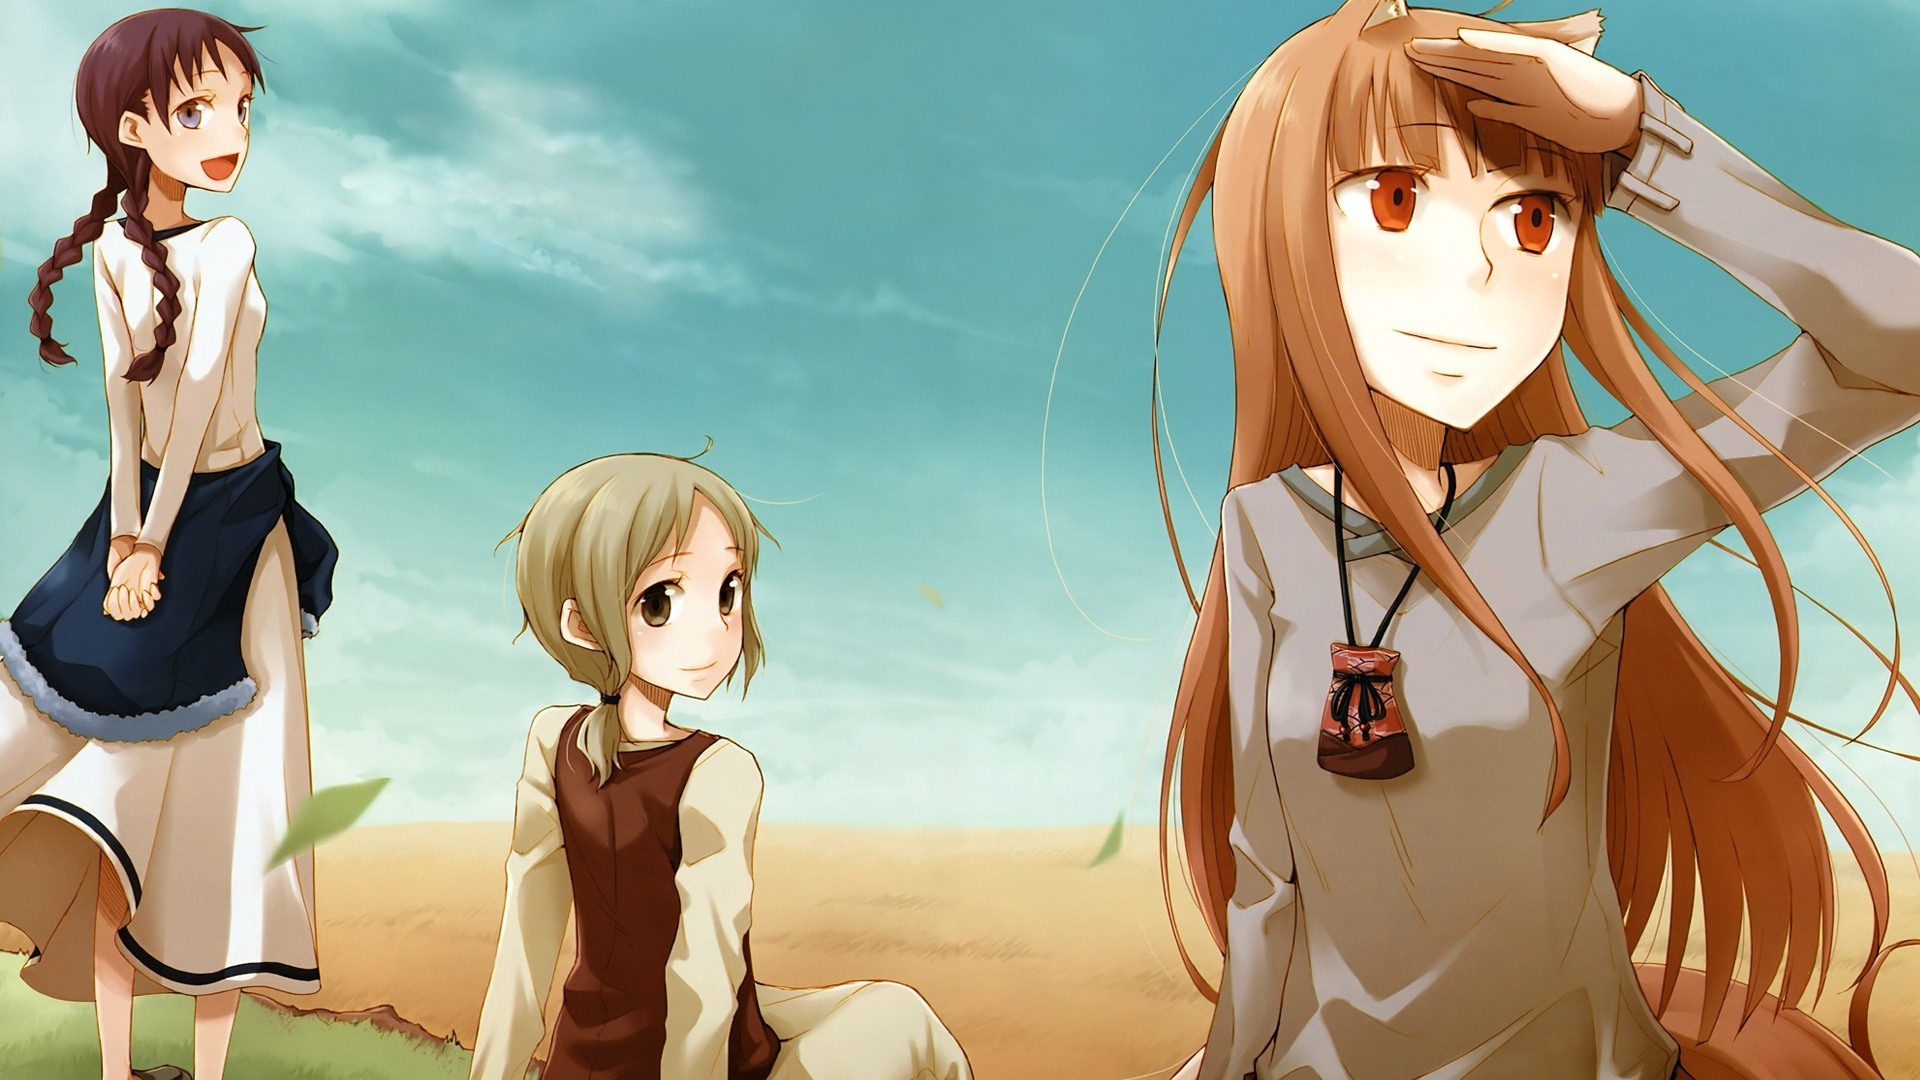 Spice and Wolf HD wallpapers #5 - 1920x1080